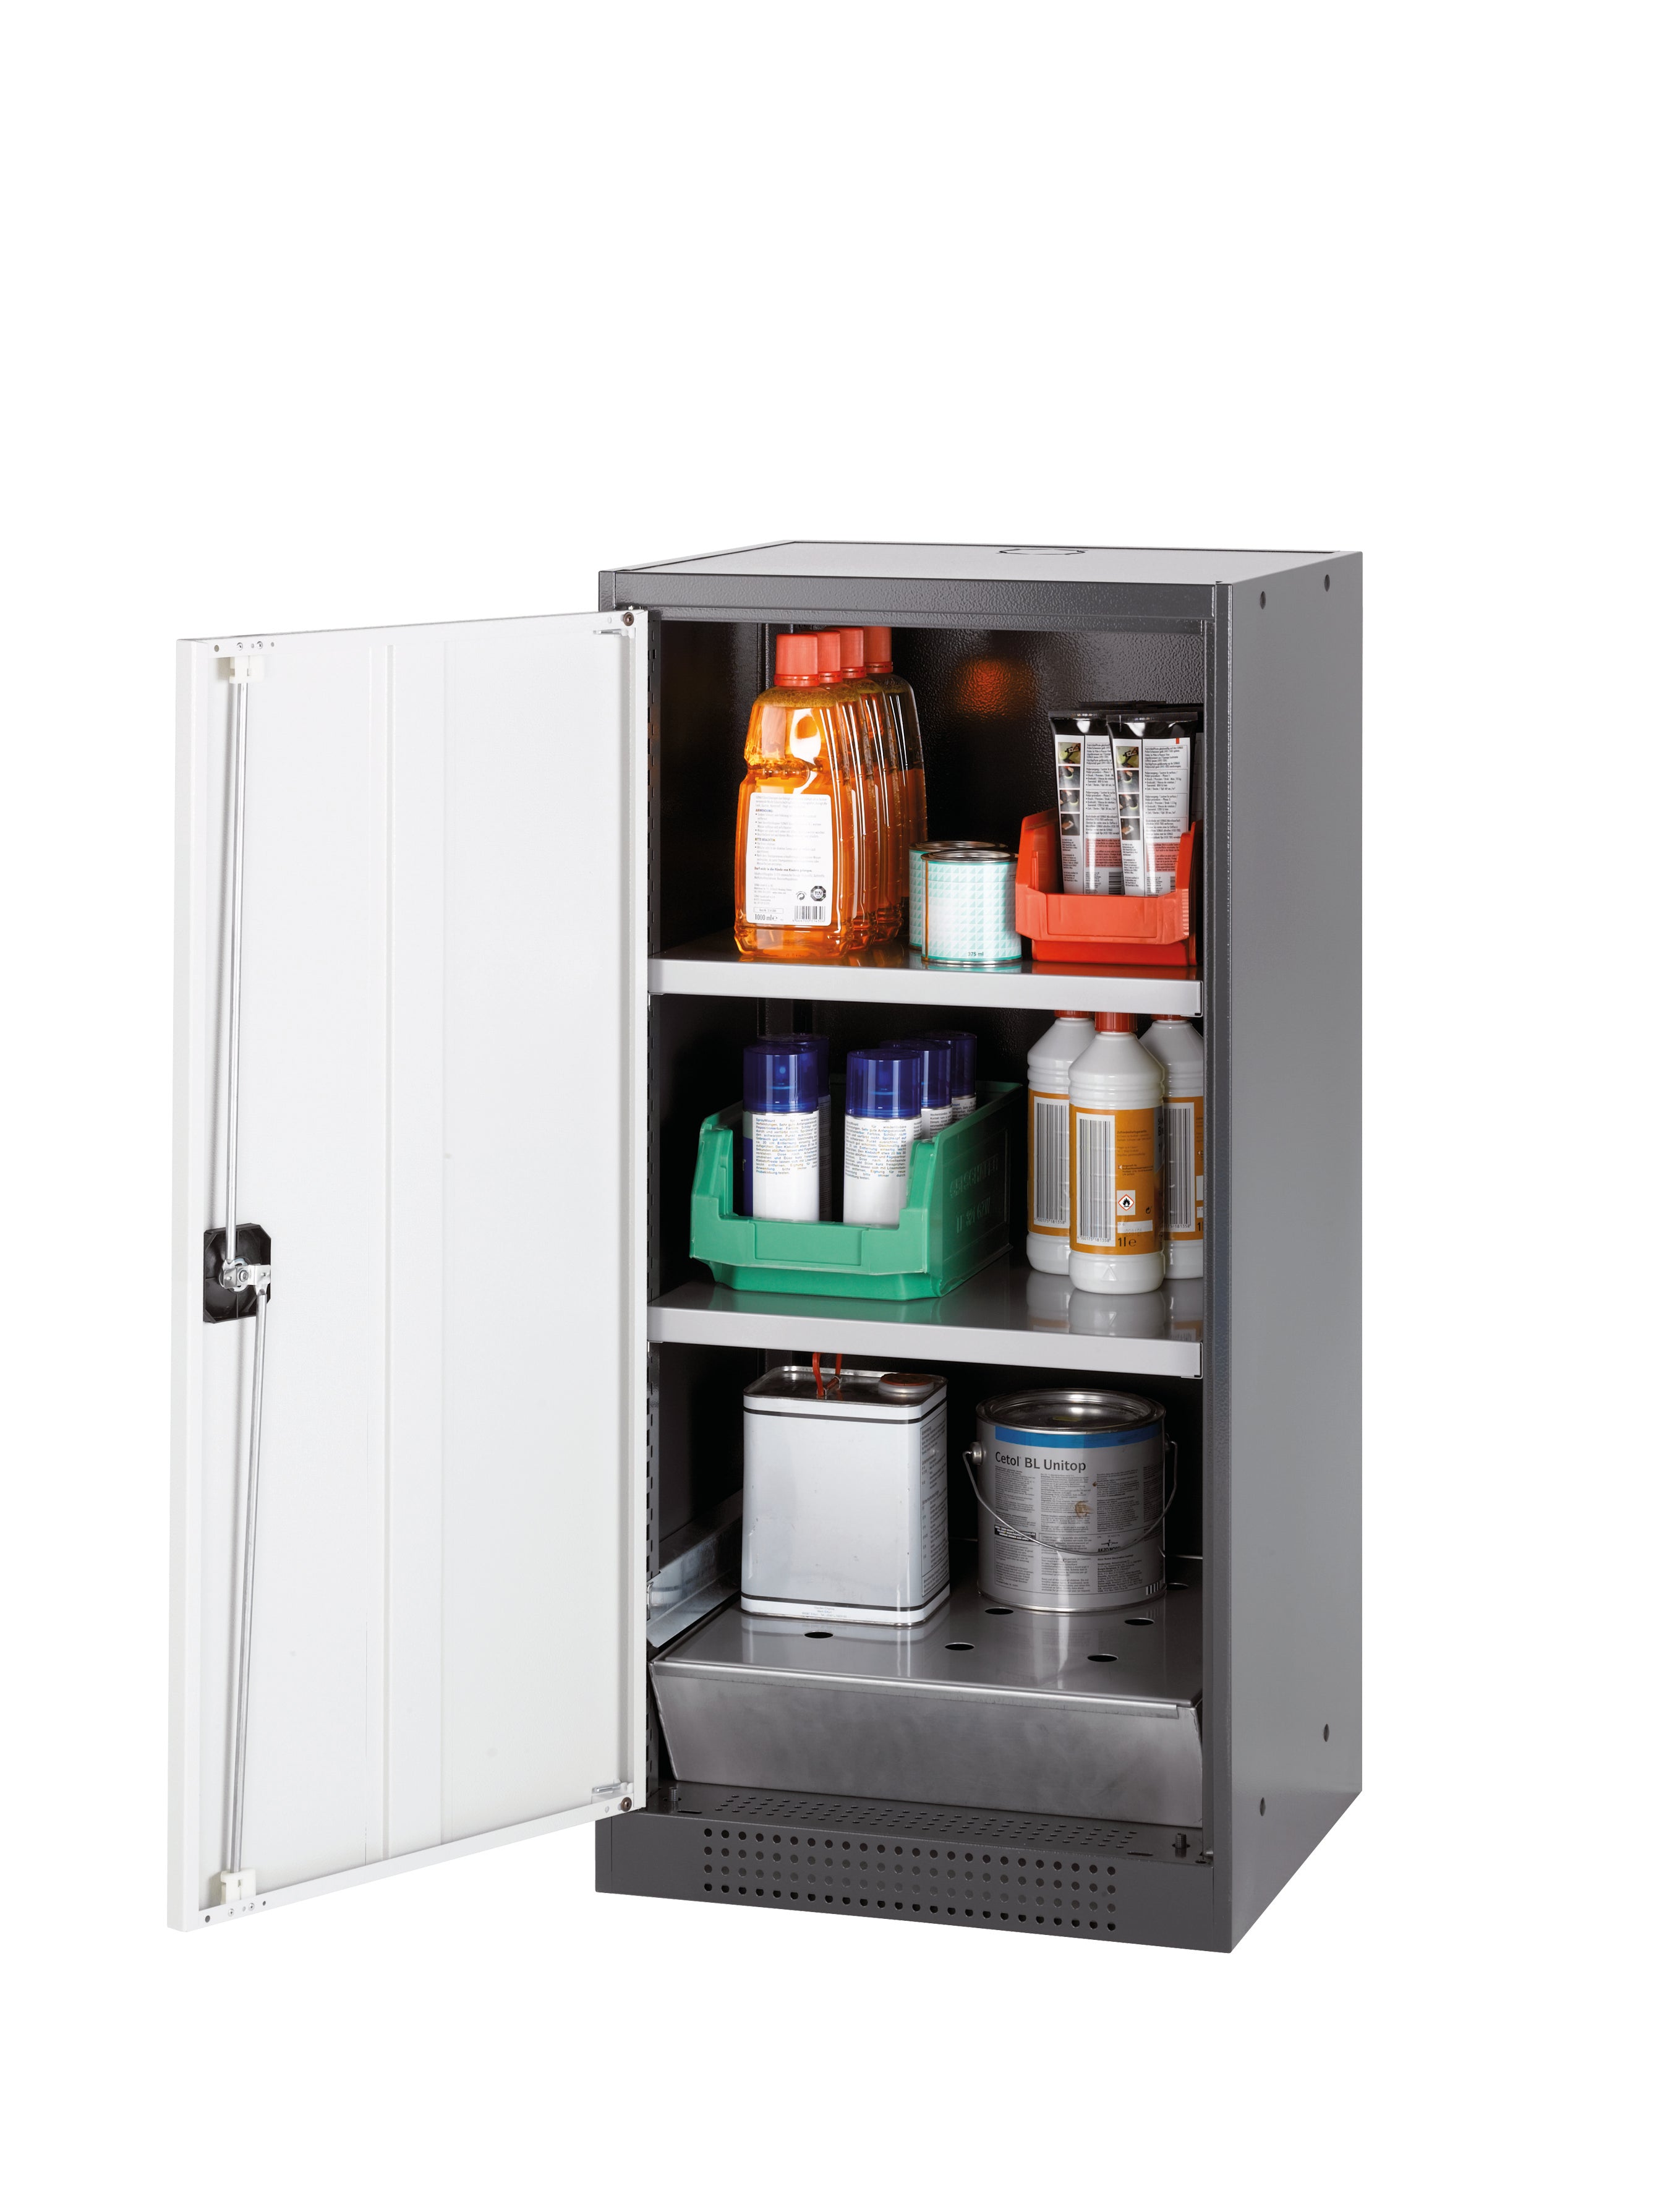 Chemical cabinet CS-CLASSIC model CS.110.054 in pure white RAL 9010 with 2x standard shelves (sheet steel)